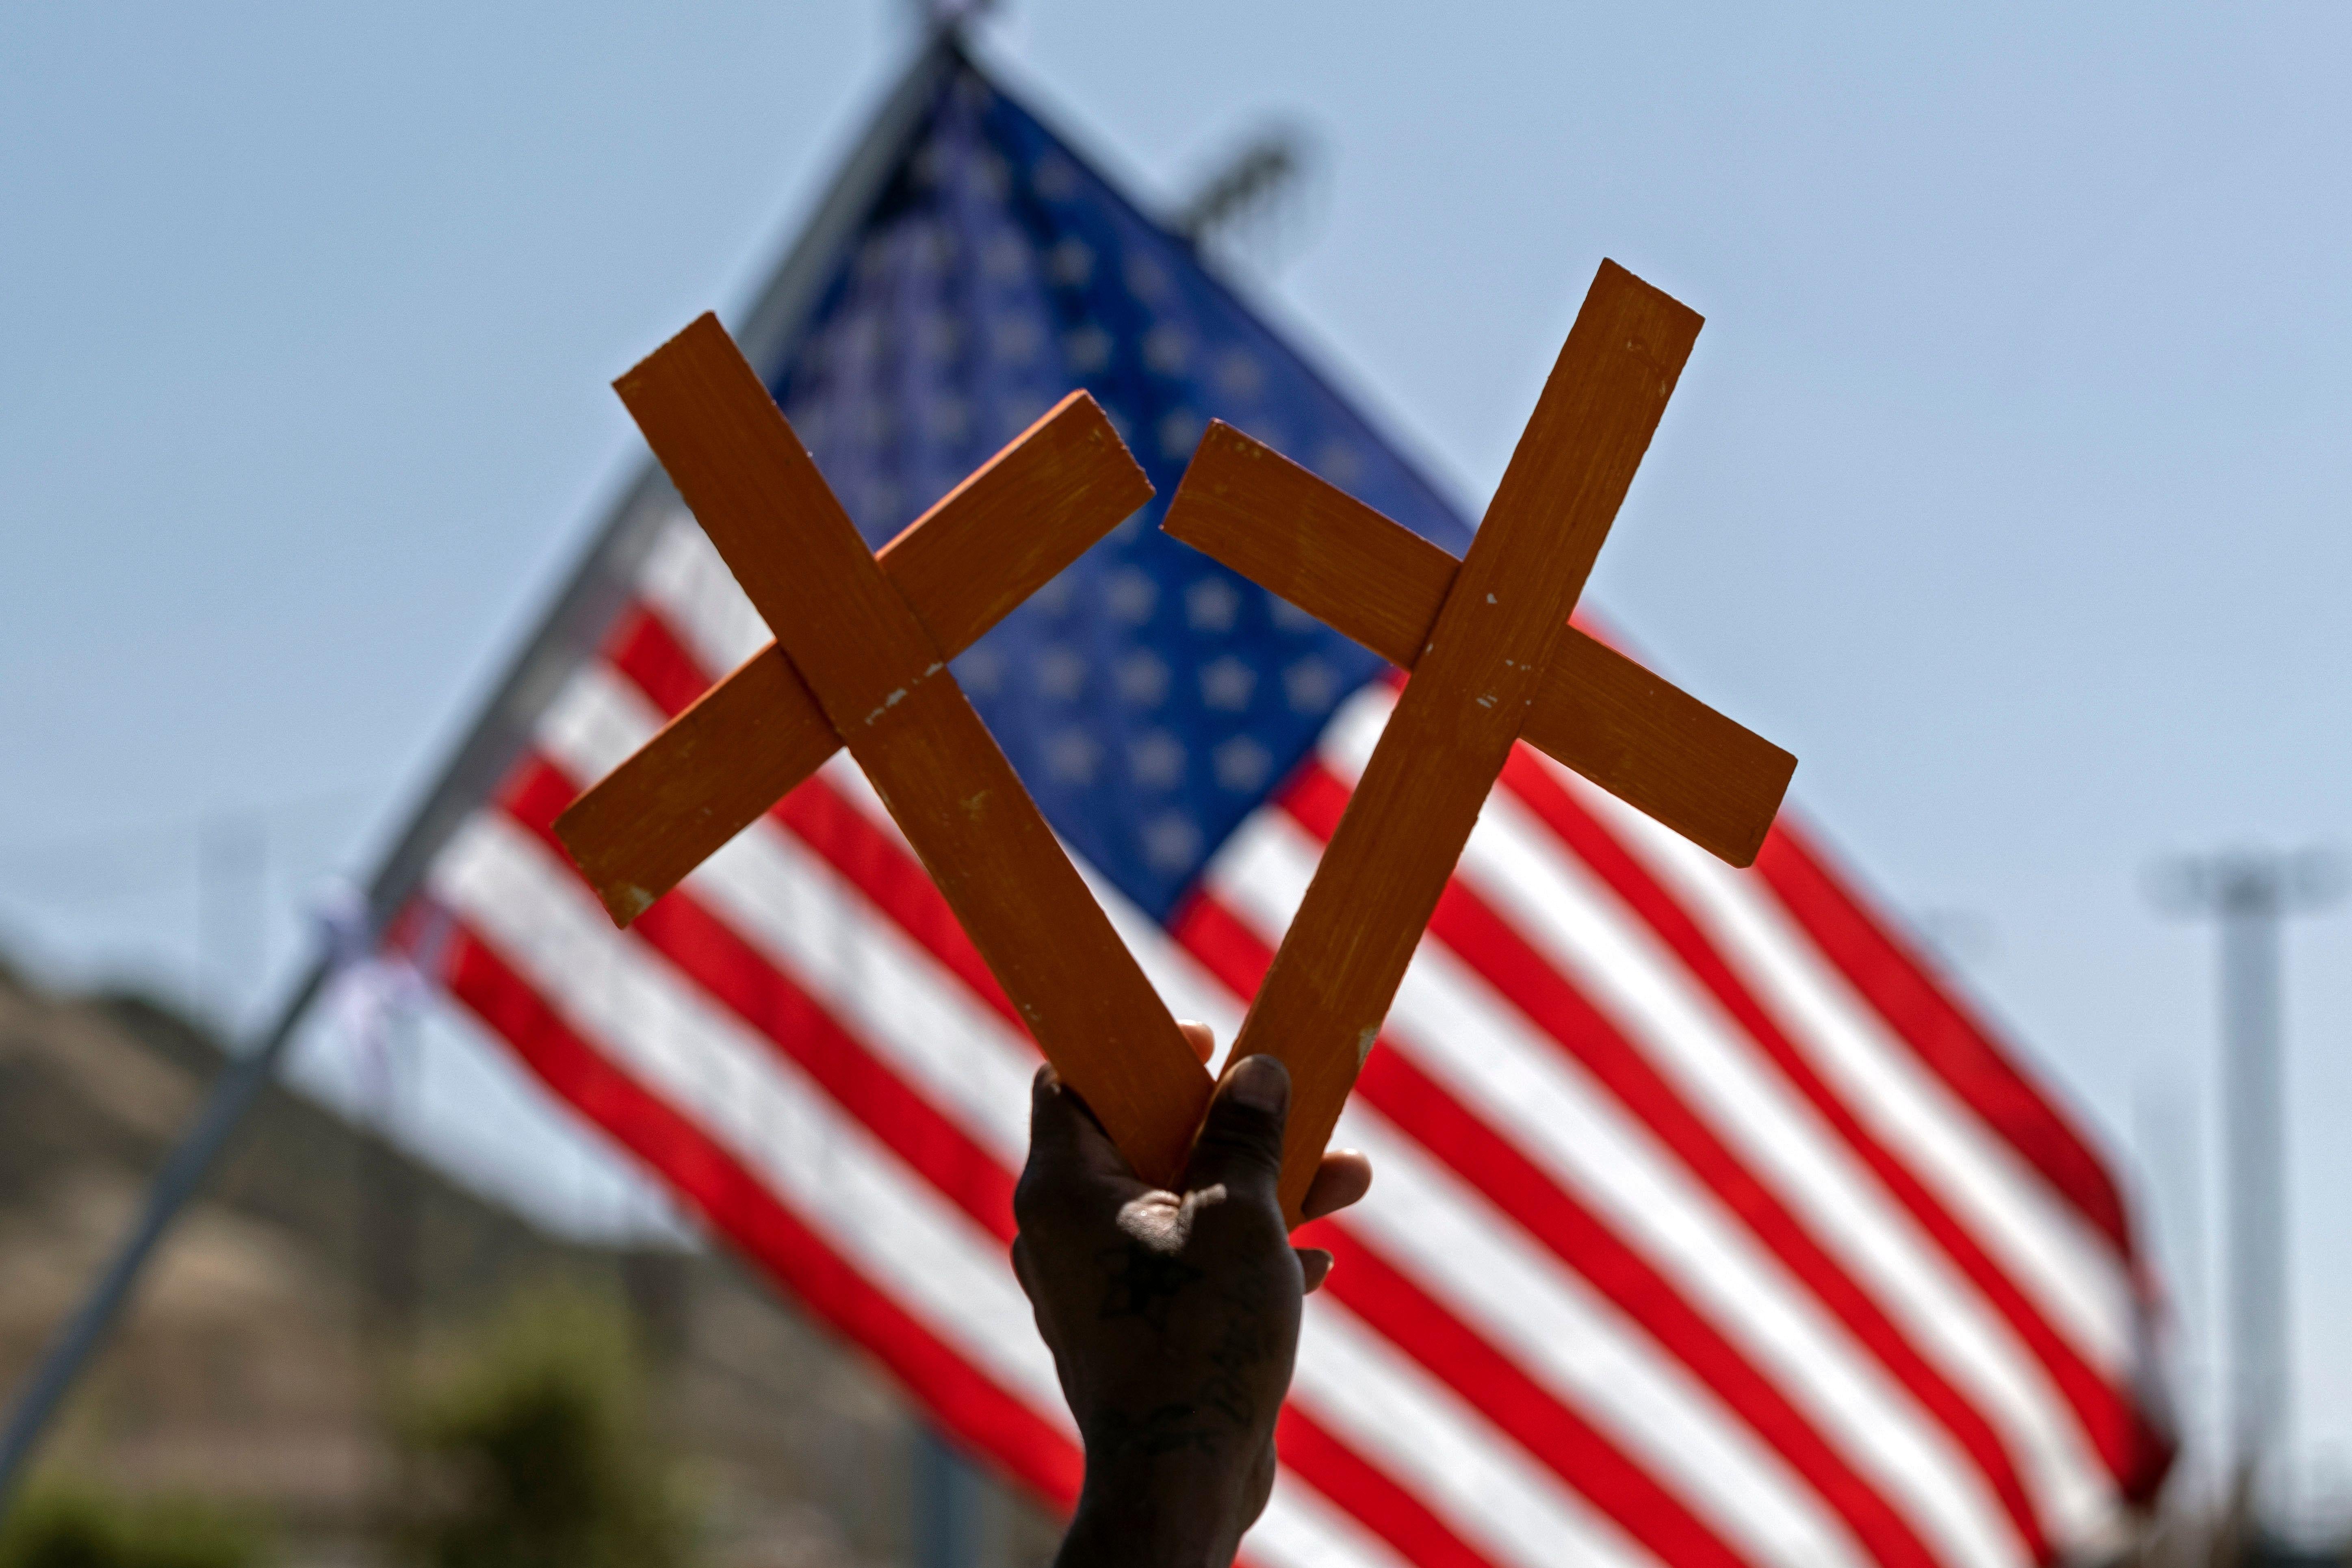 A hand holds two crosses in front of a U.S. flag.